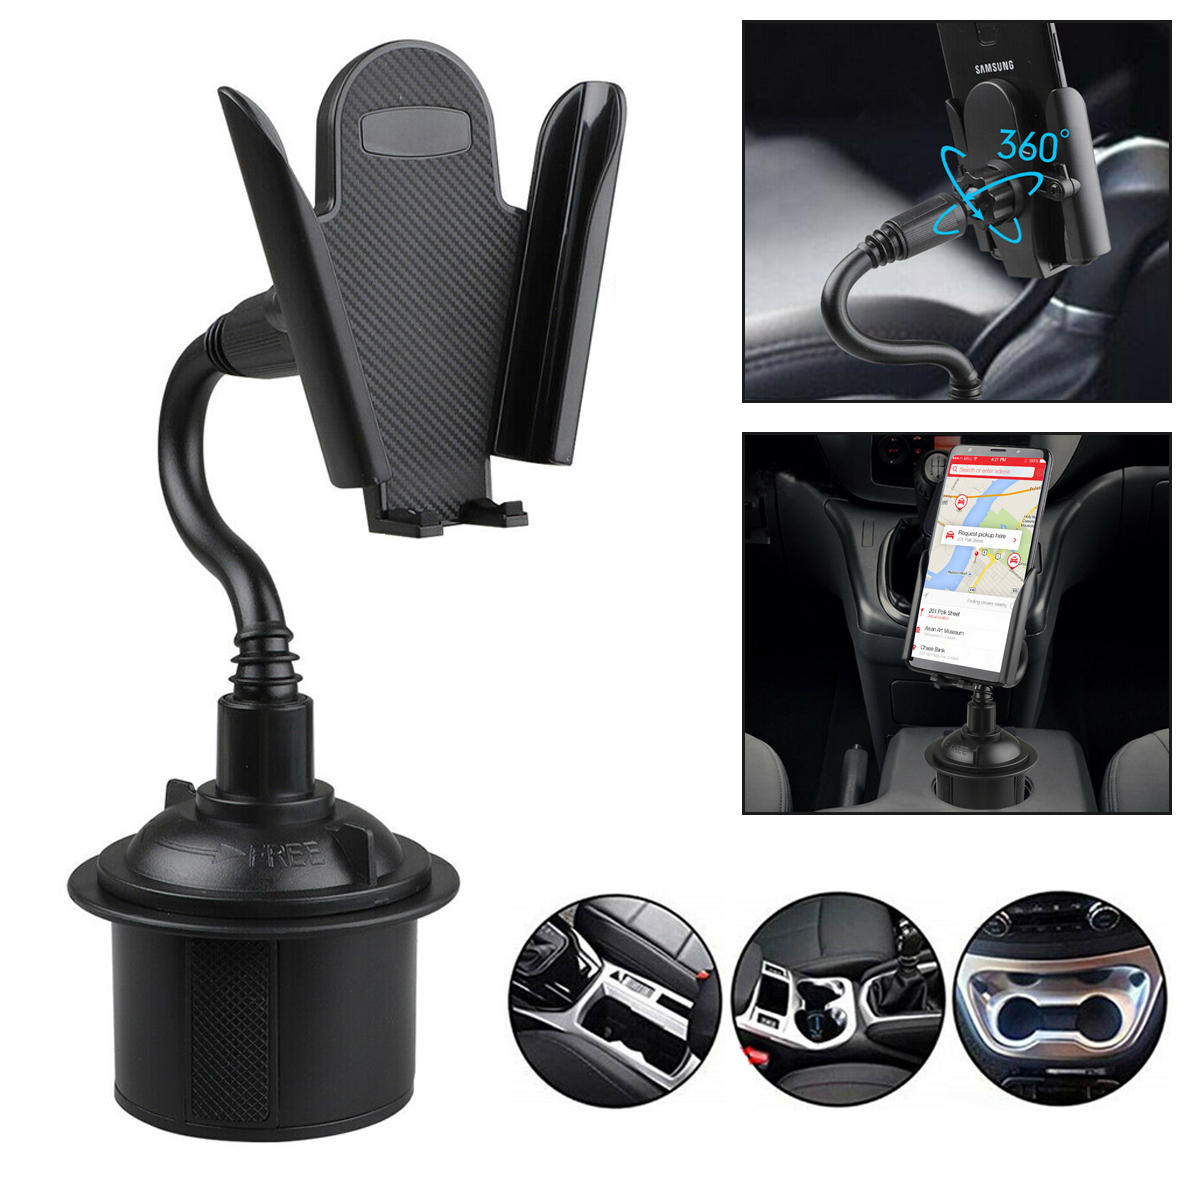 

Universal Adjustable Gooseneck Cup Cradle Car Phone Holder For Cell Phone GPS